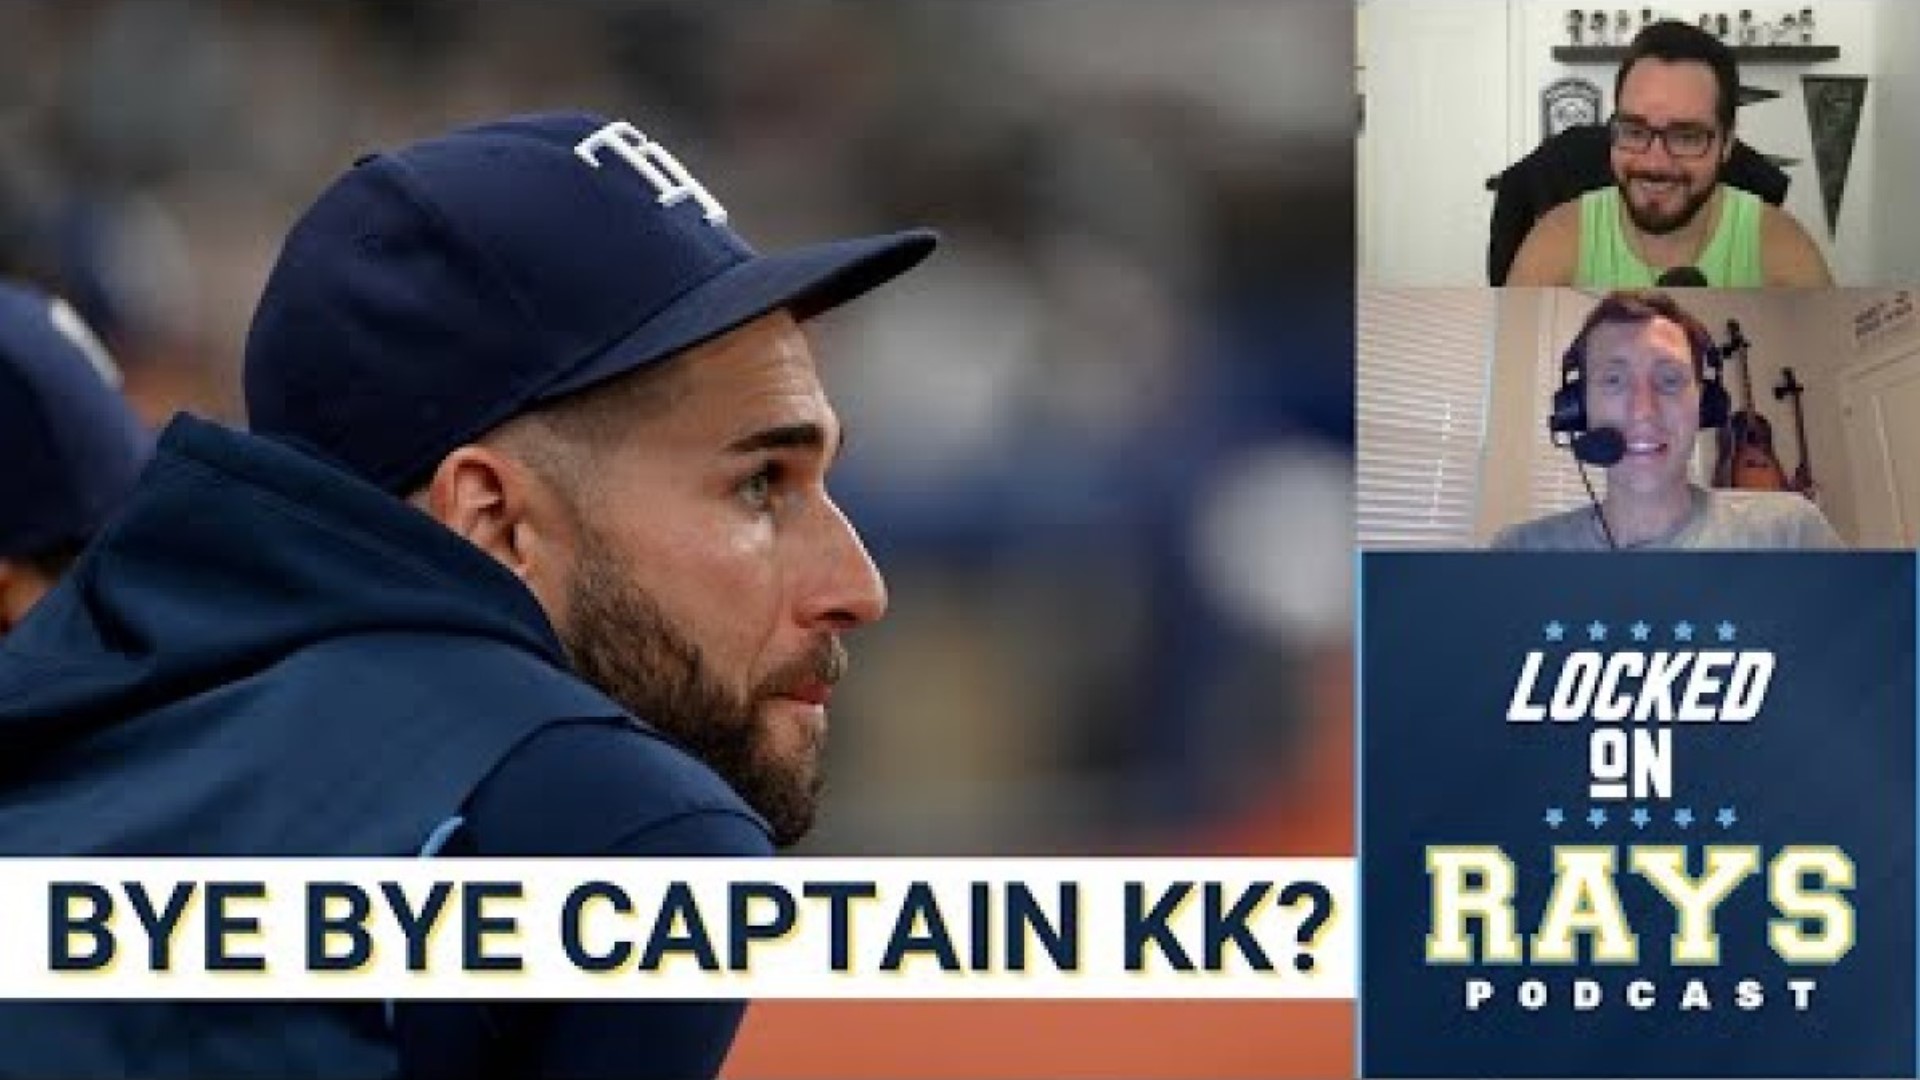 Kevin Kiermaier told Rays they'd miss him. He backs it up with hot